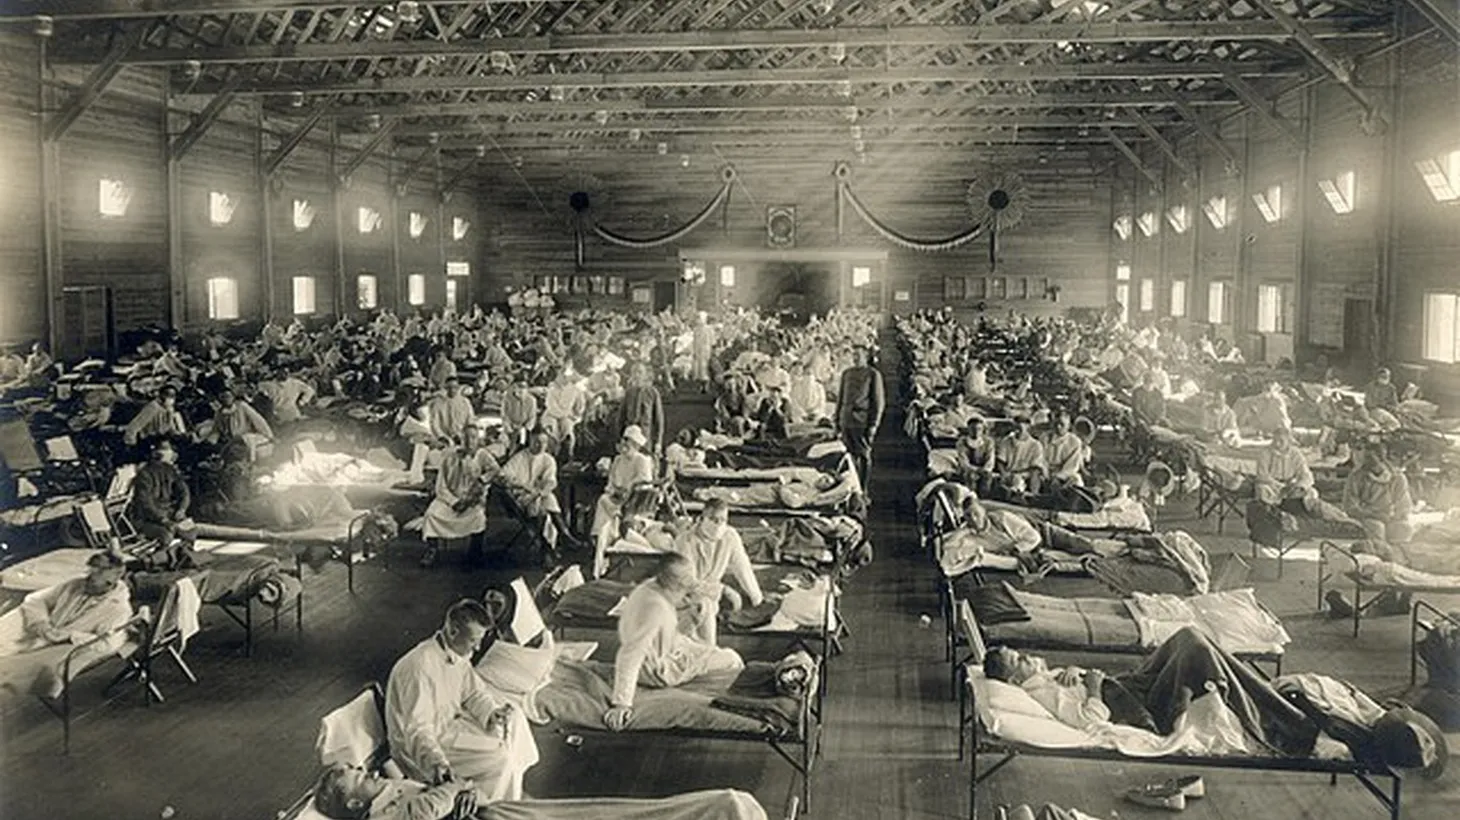 Some 700,000 Americans died due to the 1918 Spanish Flu.